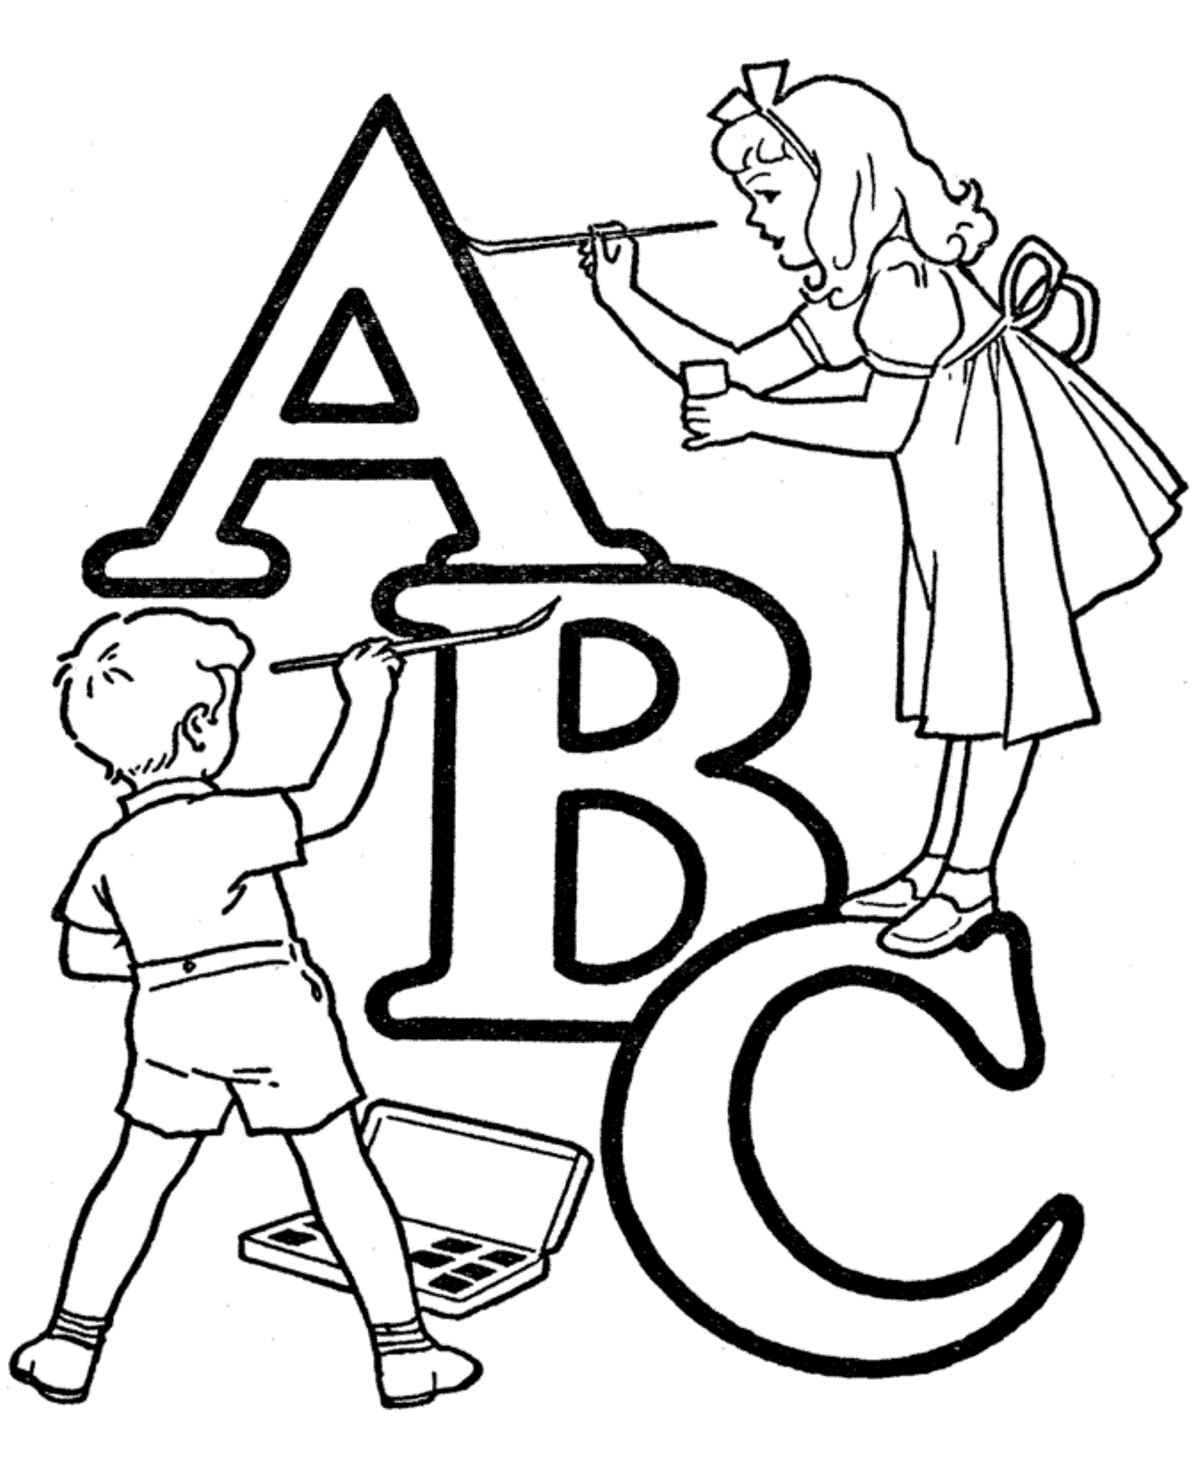 Abc Printable Coloring Pages - Coloring Pages For All Ages